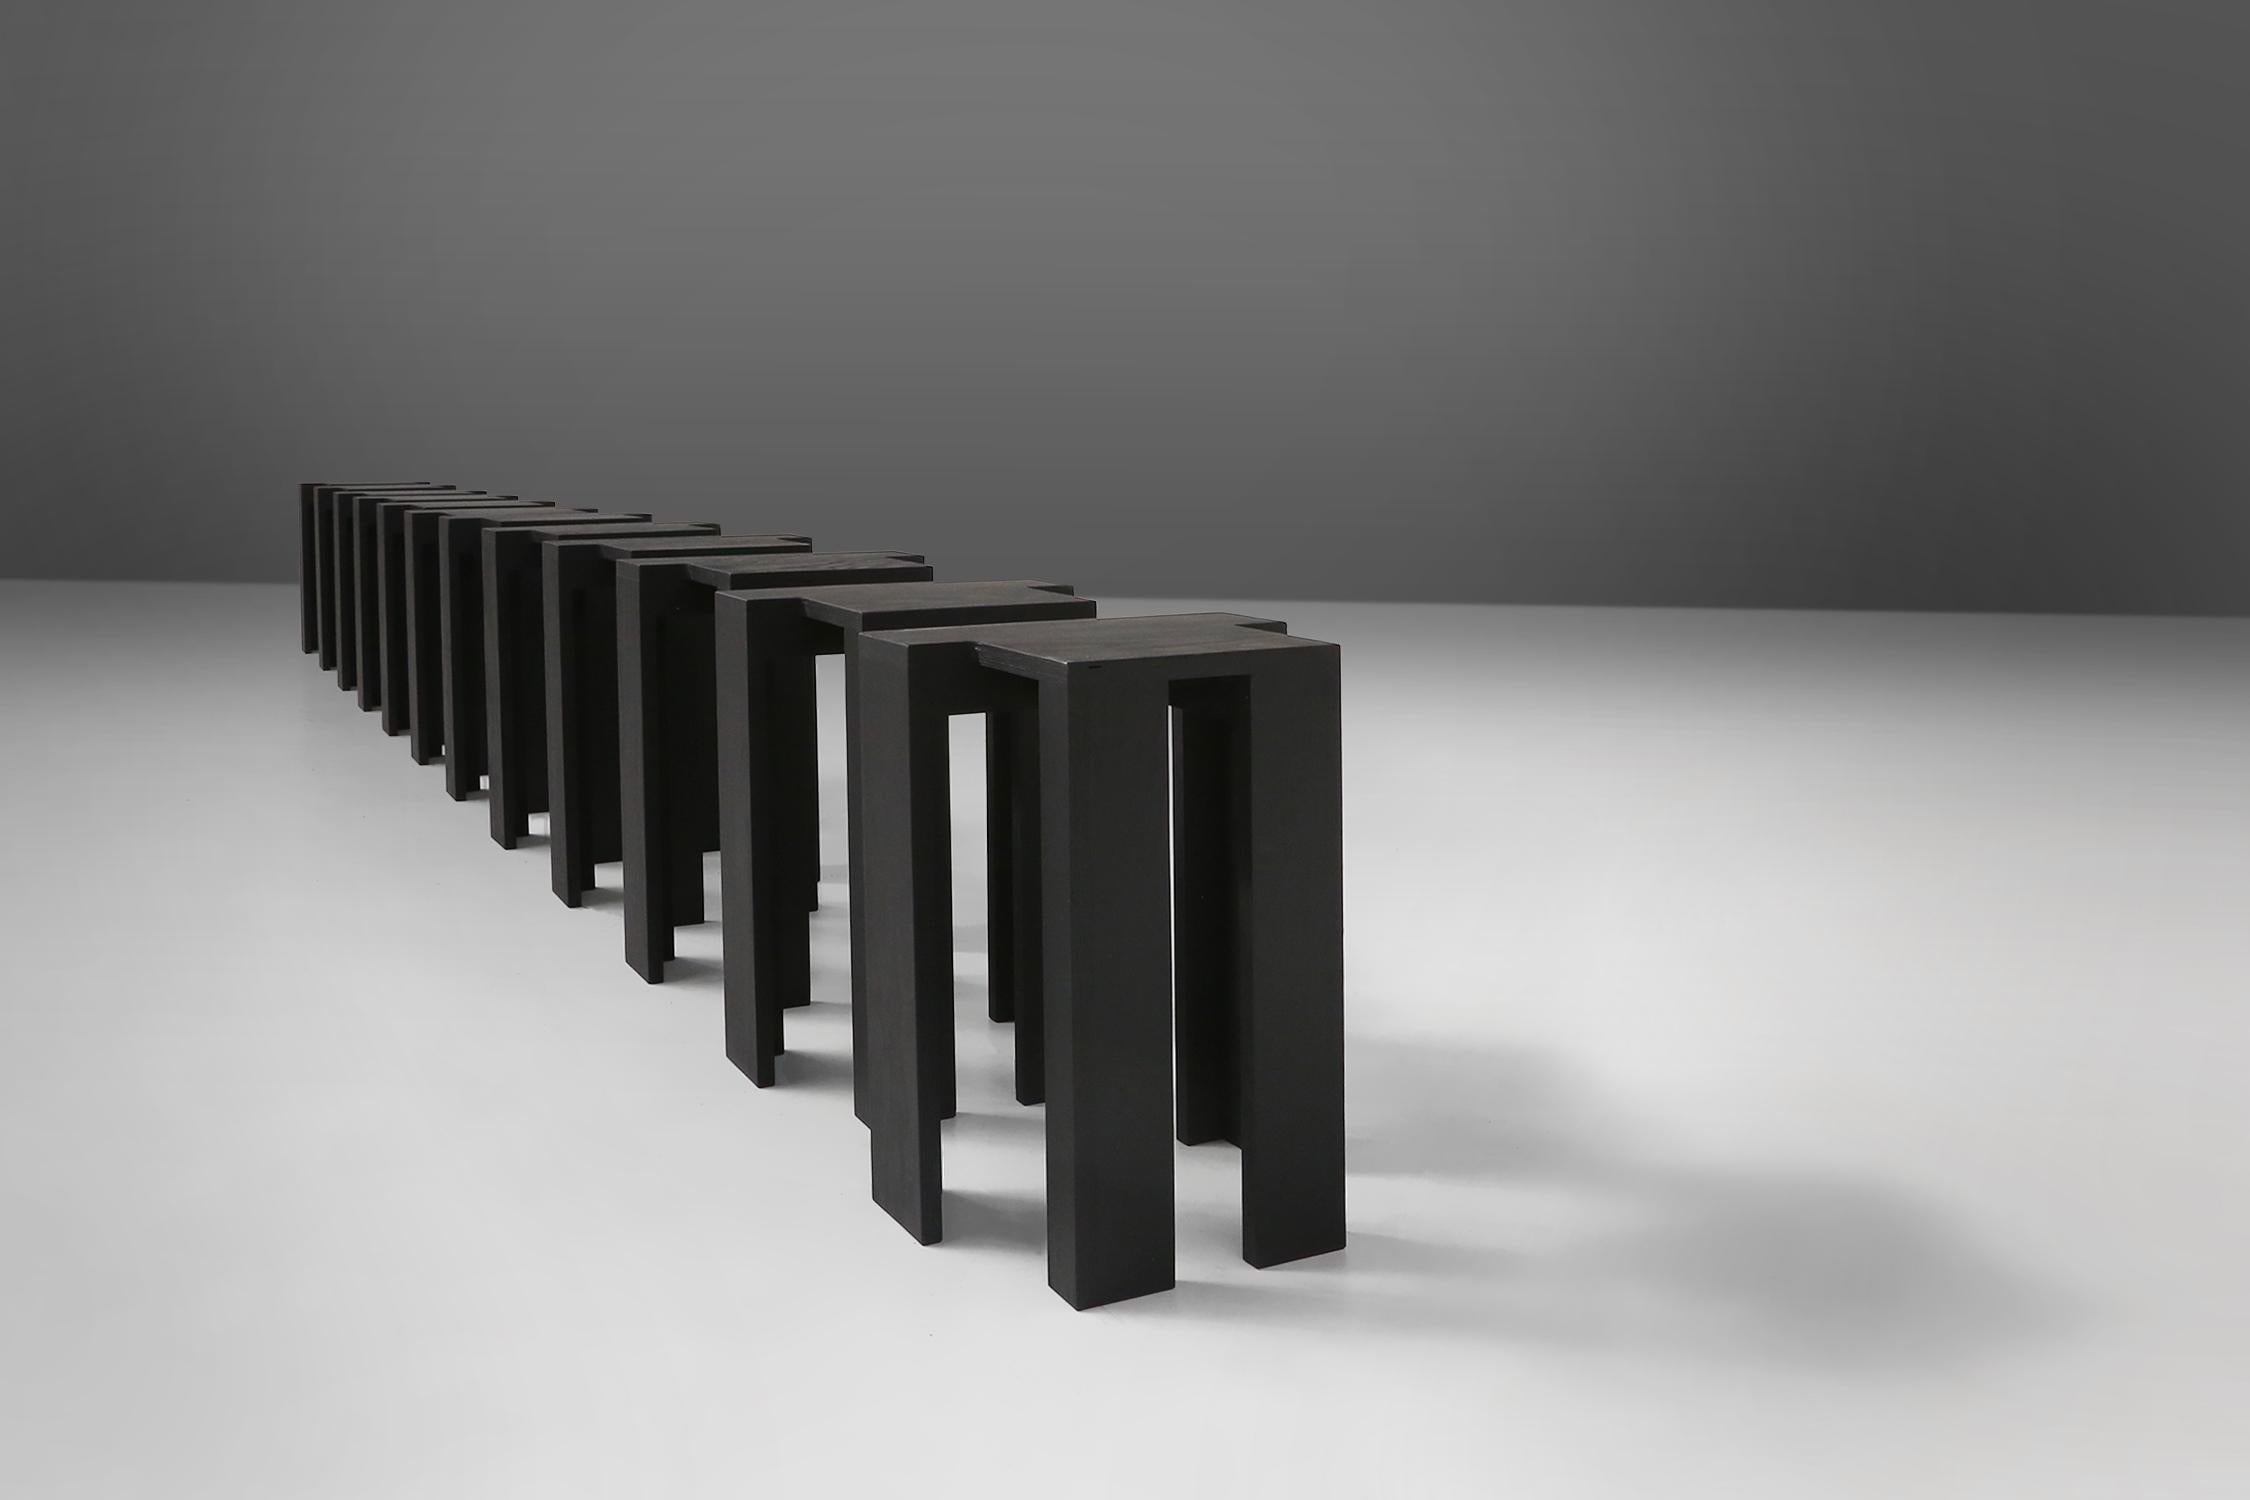 Belgium / 2017 / Bram Vanderbeke / 12 stools / pine plywood / modern

These sleek black stackable stools are designed by the Belgium designer Bram Vanderbeke in 2017 and are the perfect addition to any contemporary interior. The black stools are